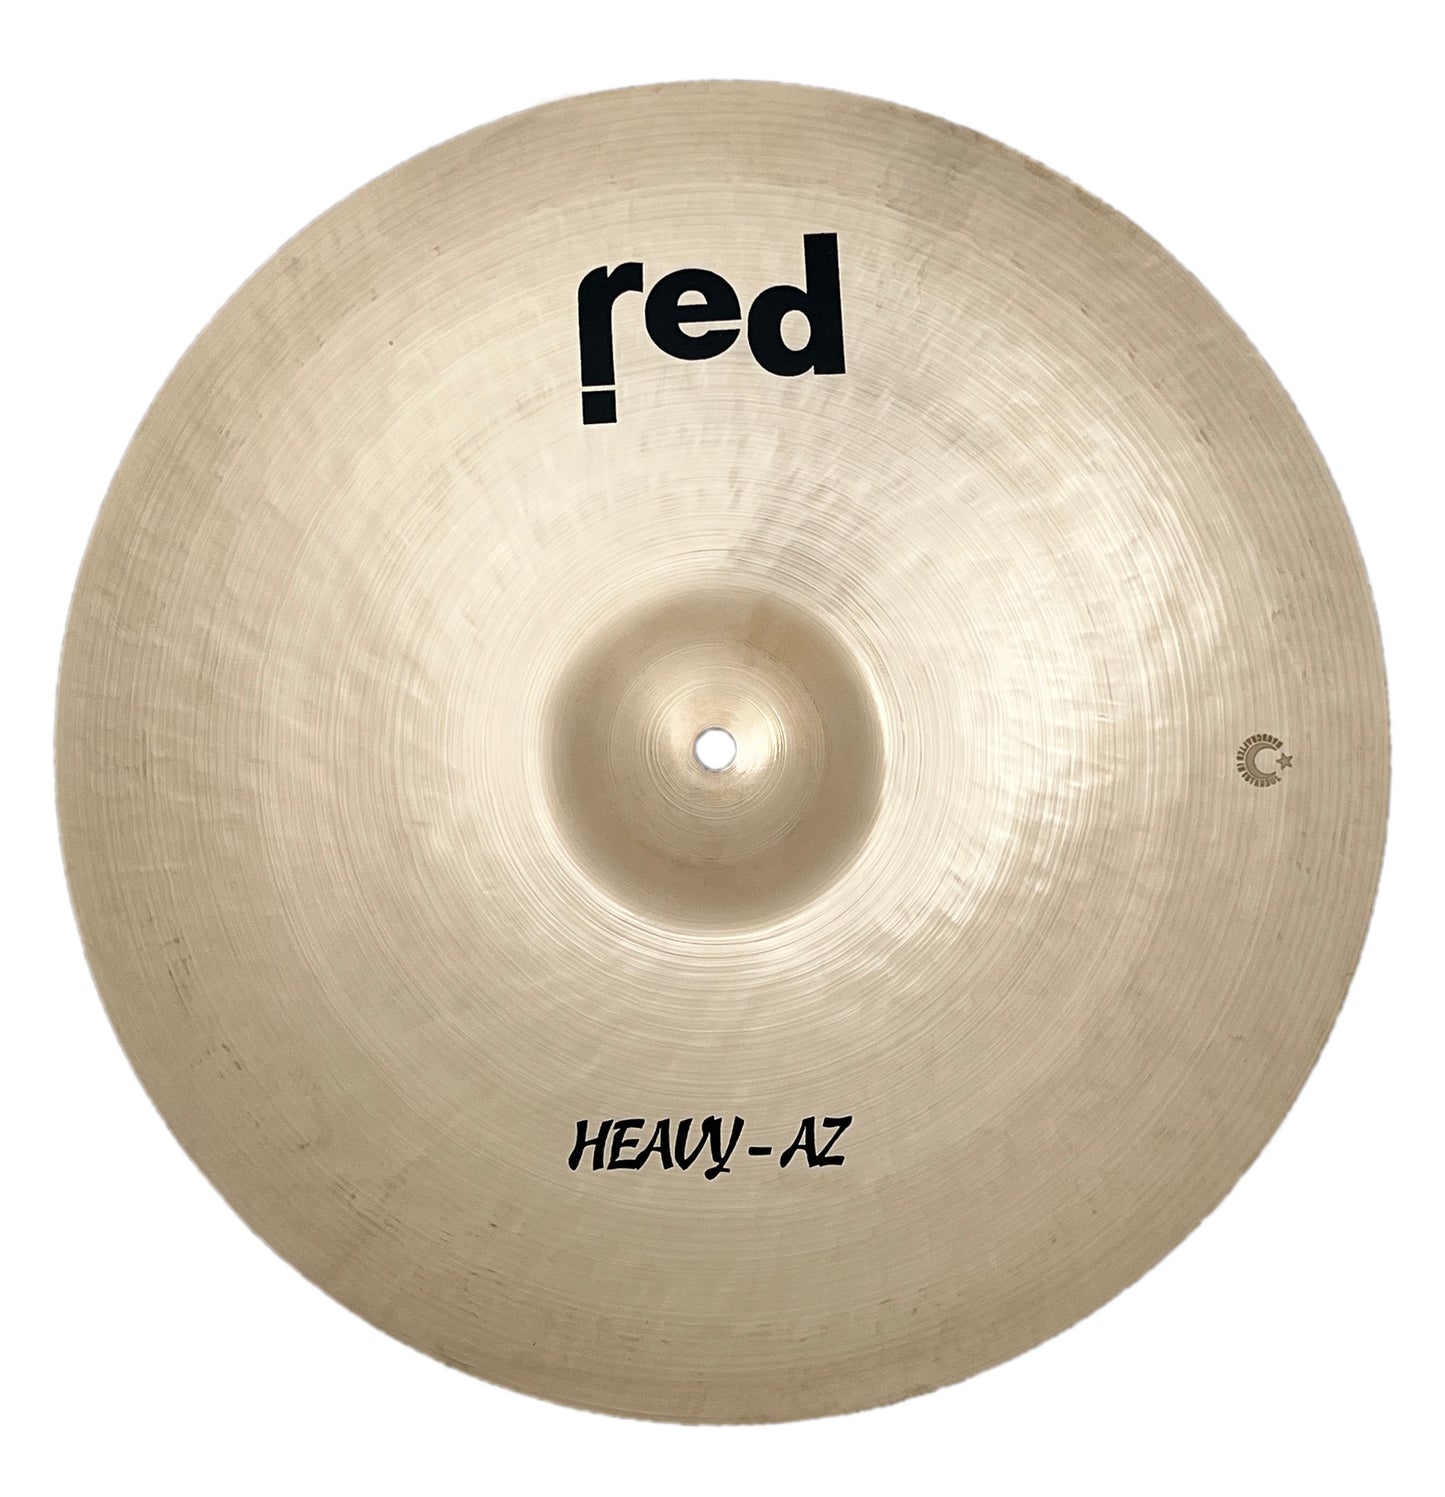 Red Cymbals Heavy Az Series Ride Cymbal